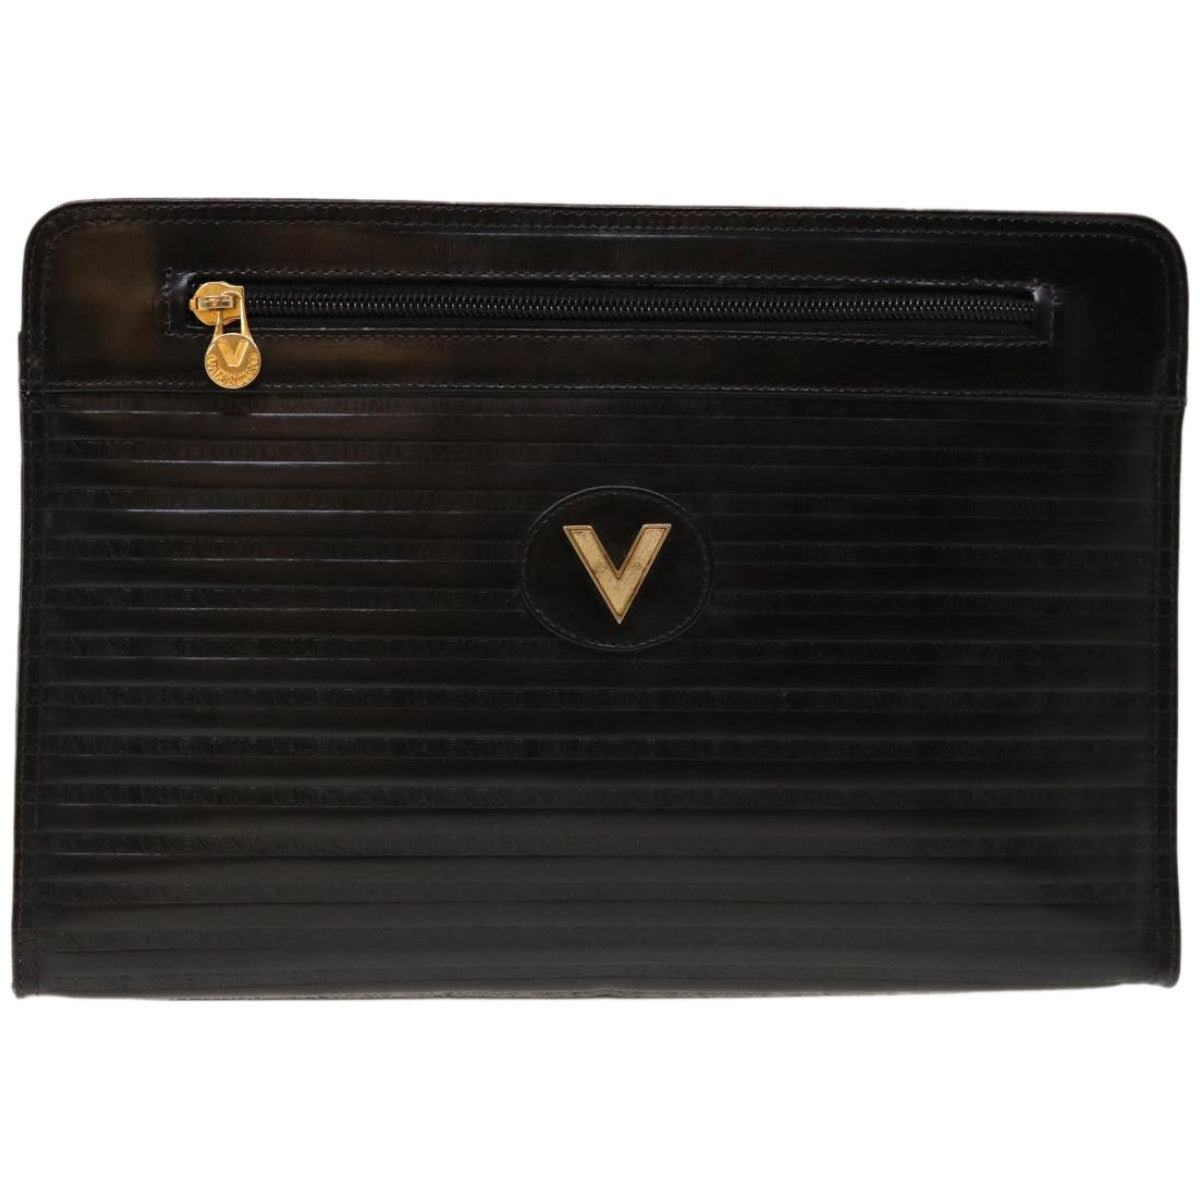 VALENTINO Clutch Bag Leather Black Auth 65385